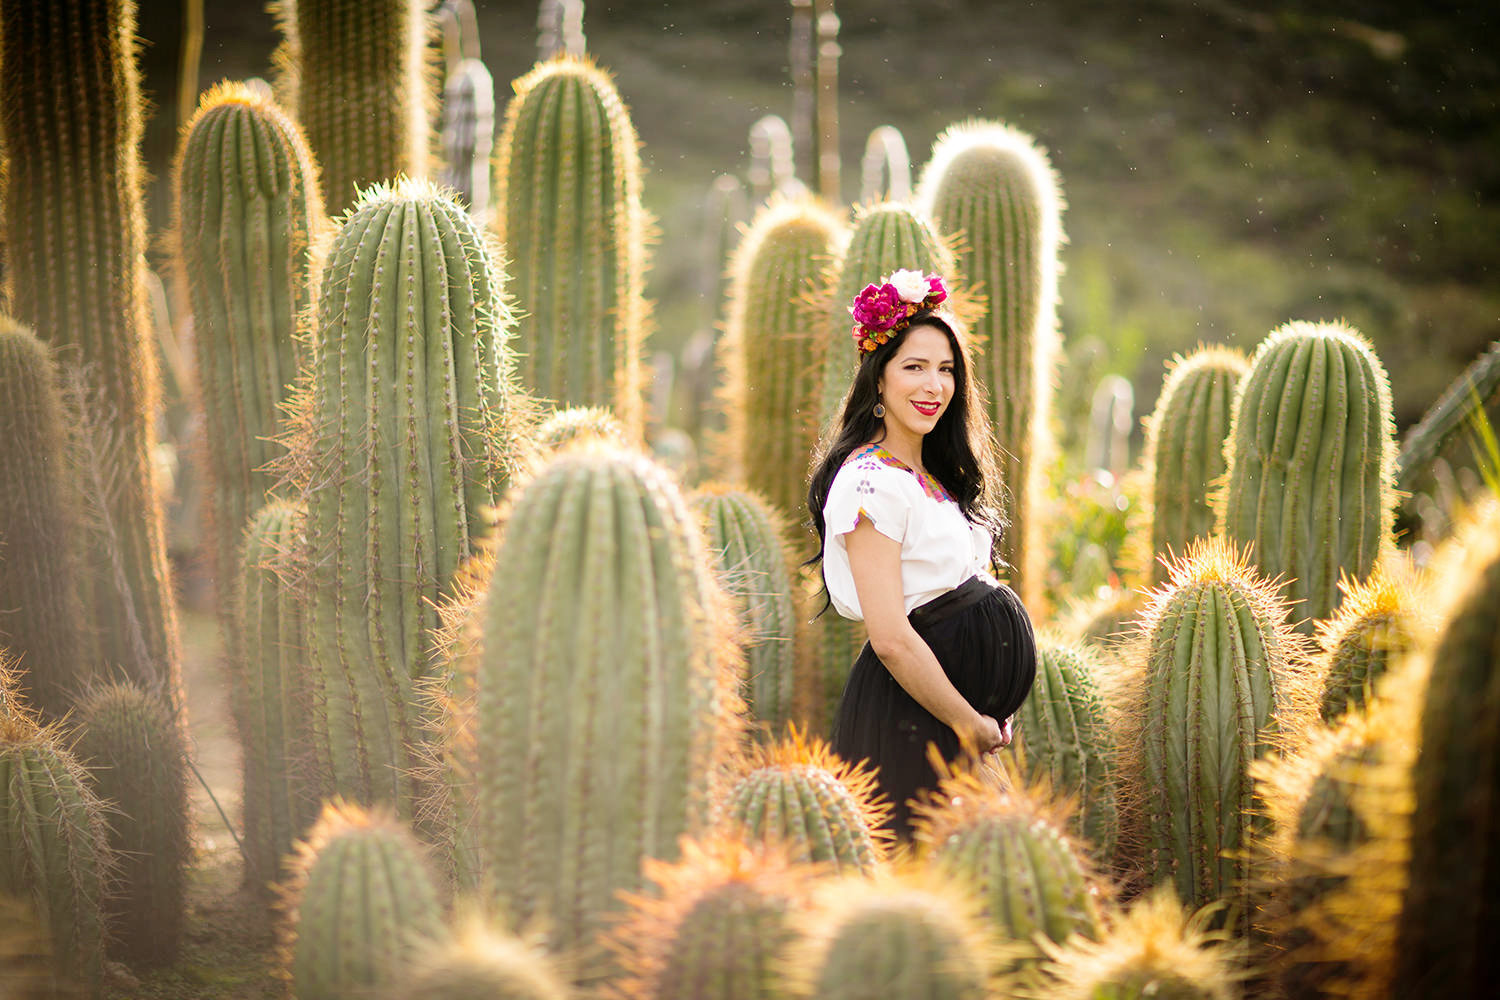 Cactus field Maternity Session in San Diego.